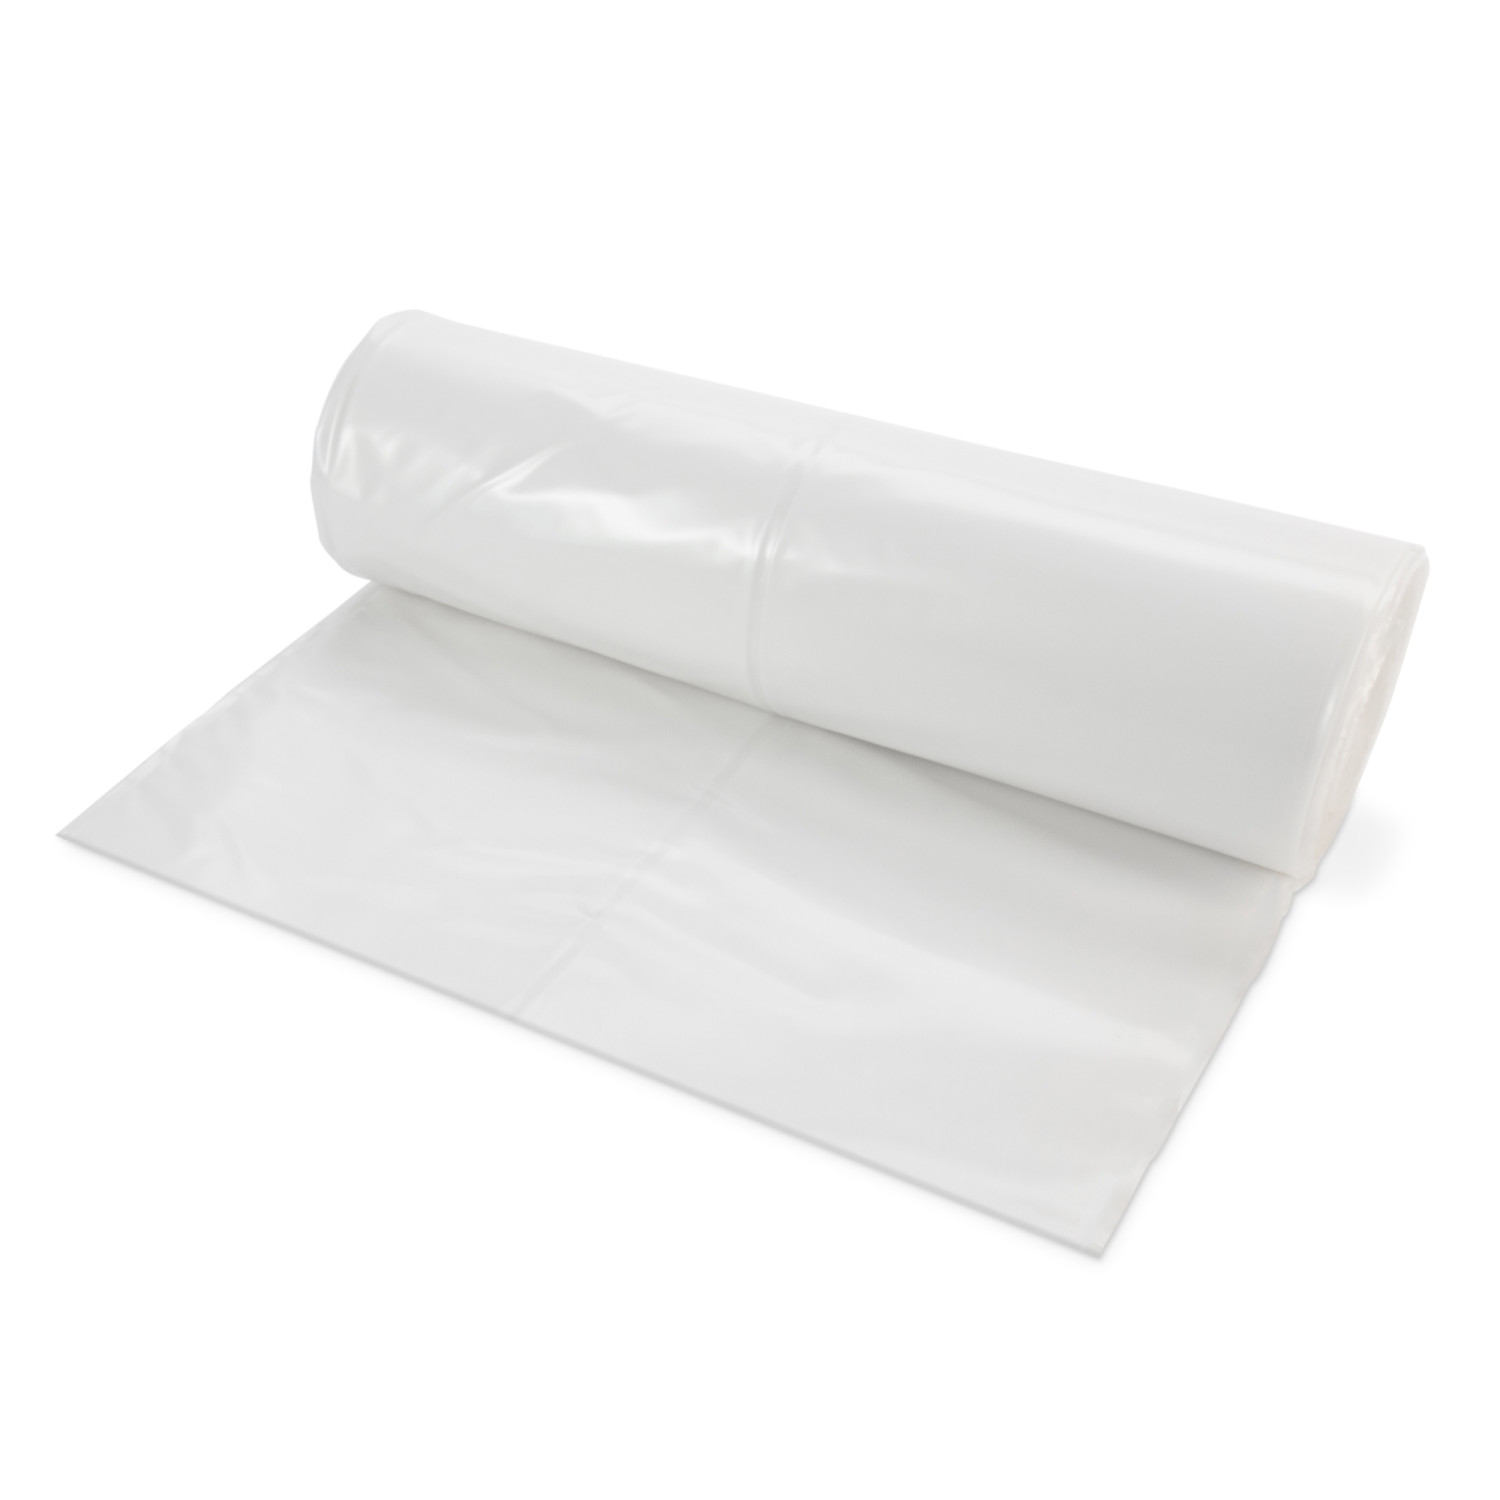 Idl Packaging Clear 4 Mil Plastic Sheeting for Painting, 4' x 50' (200 Sq. ft.) LDPE Film Roll - Heavy-Duty Thick Polyethylene for Painting